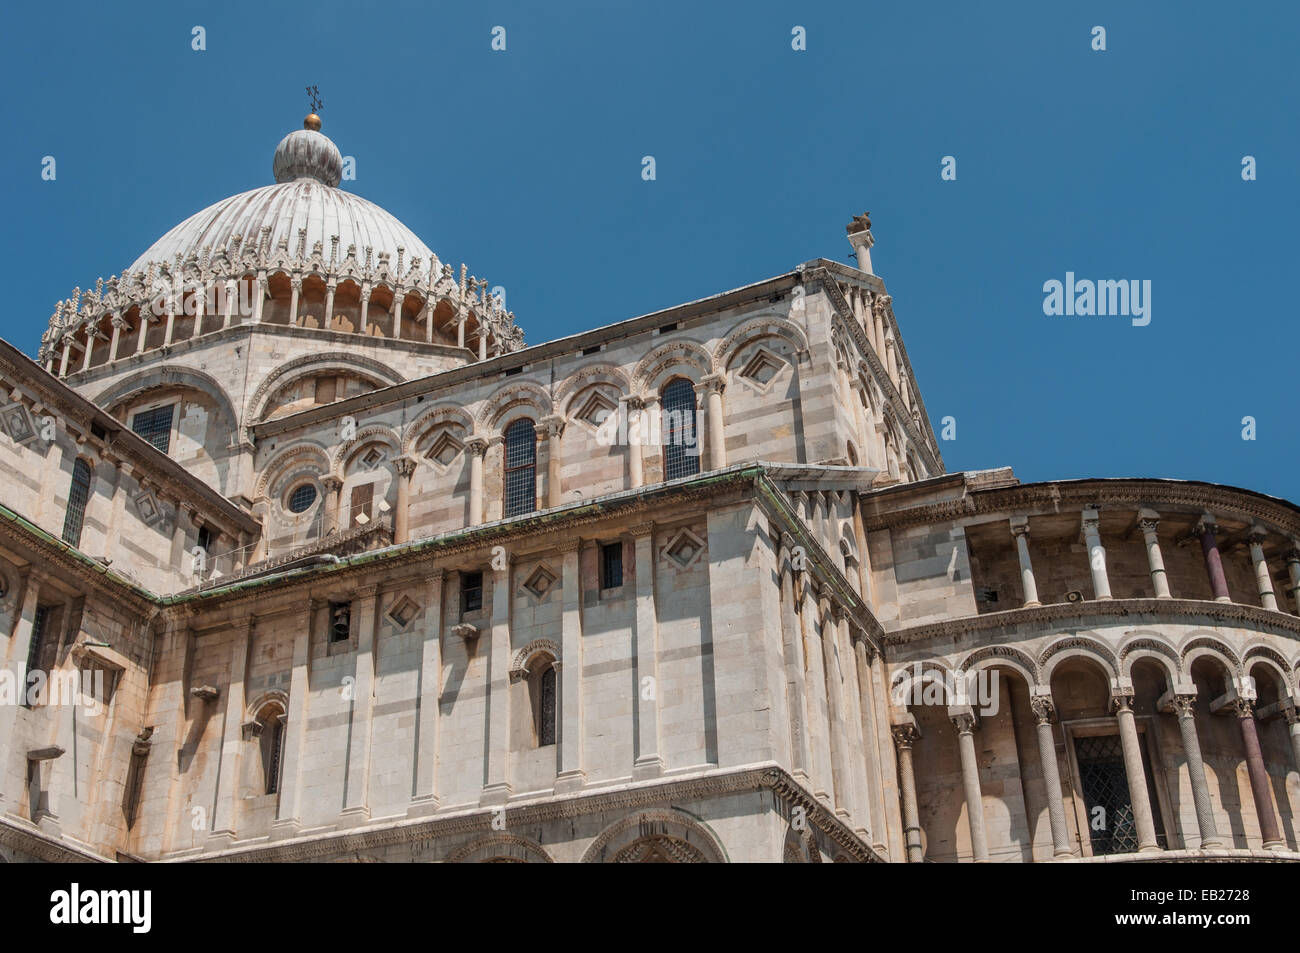 The Pisa Baptistry on Square of Miracles, Tuscany, Italy. A UNESCO World Heritage Site. Stock Photo